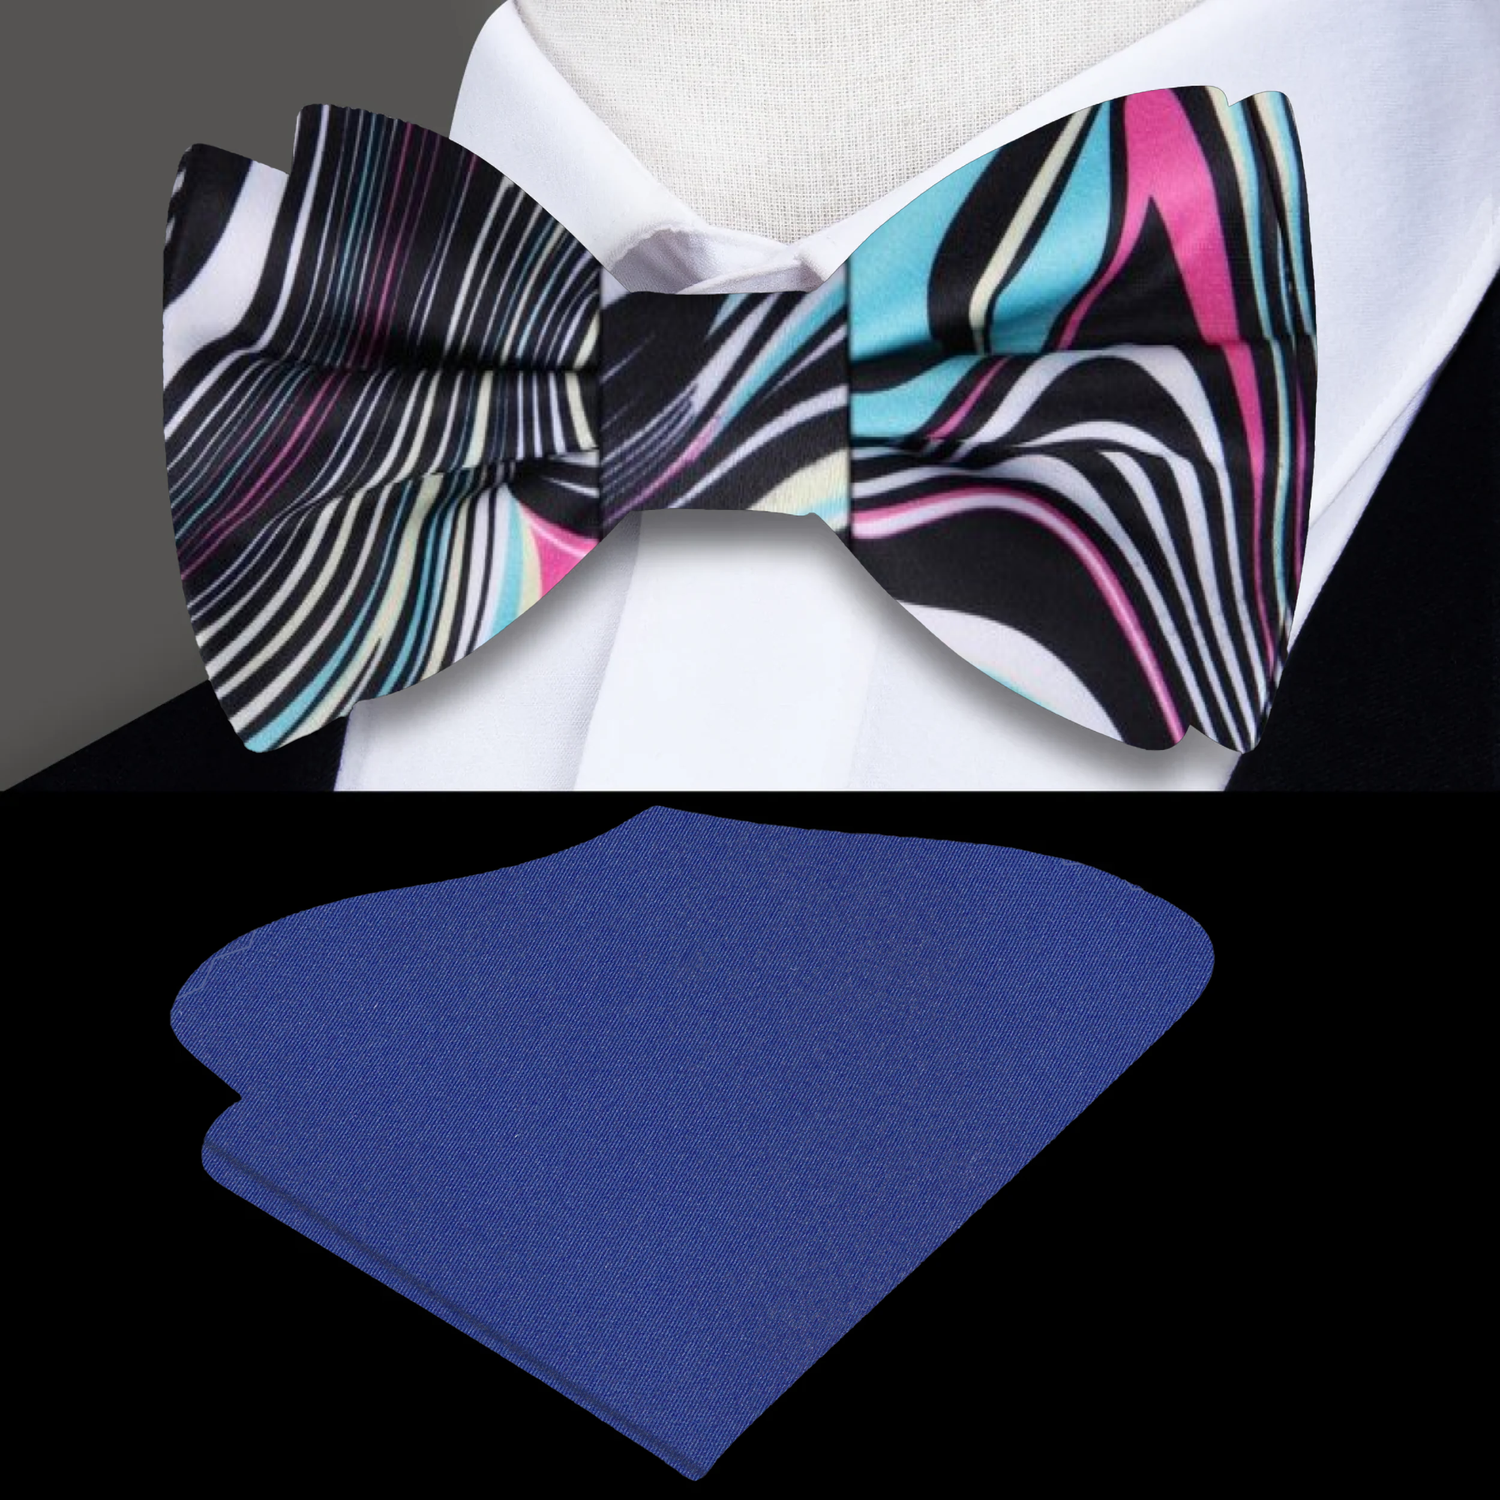 Multi Color Abstract Swirl Bow Tie and Blue Square